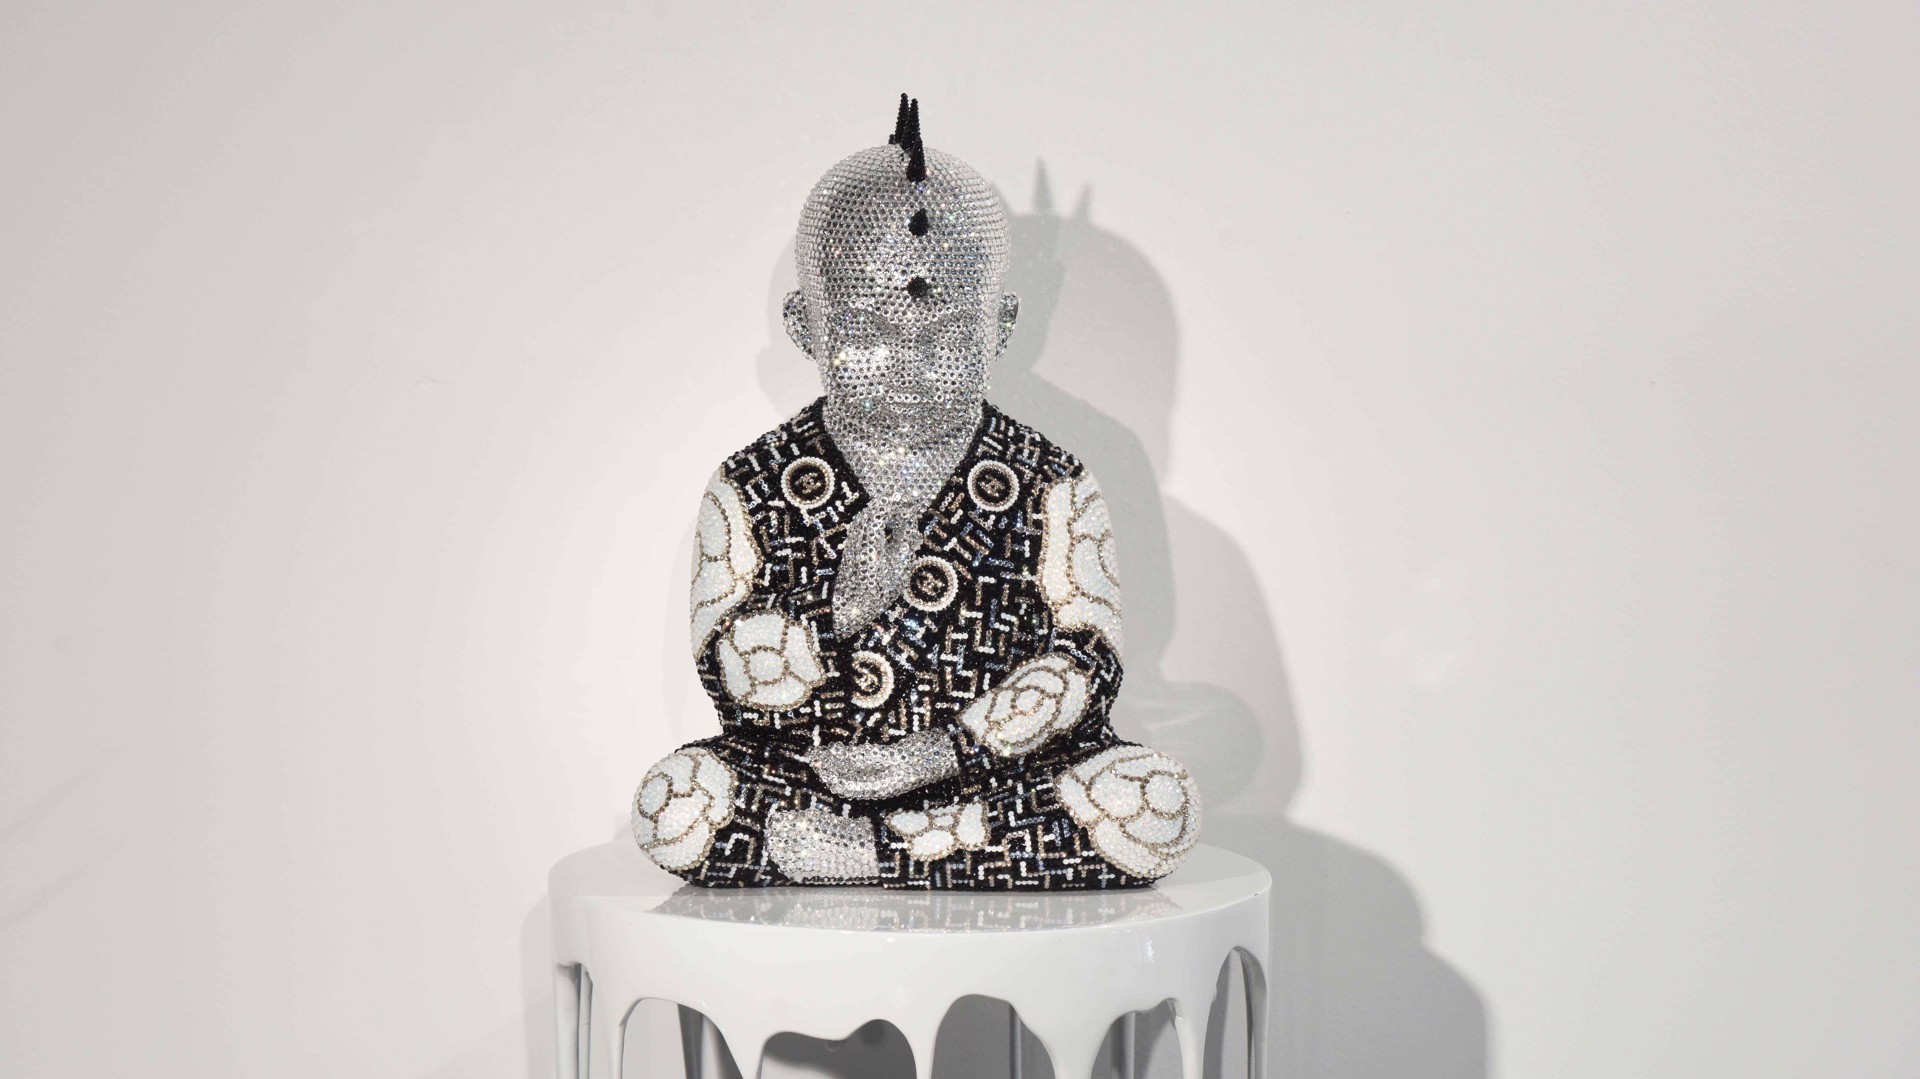 Punk Buddha Timeless feat. Chanel by Metis Atash